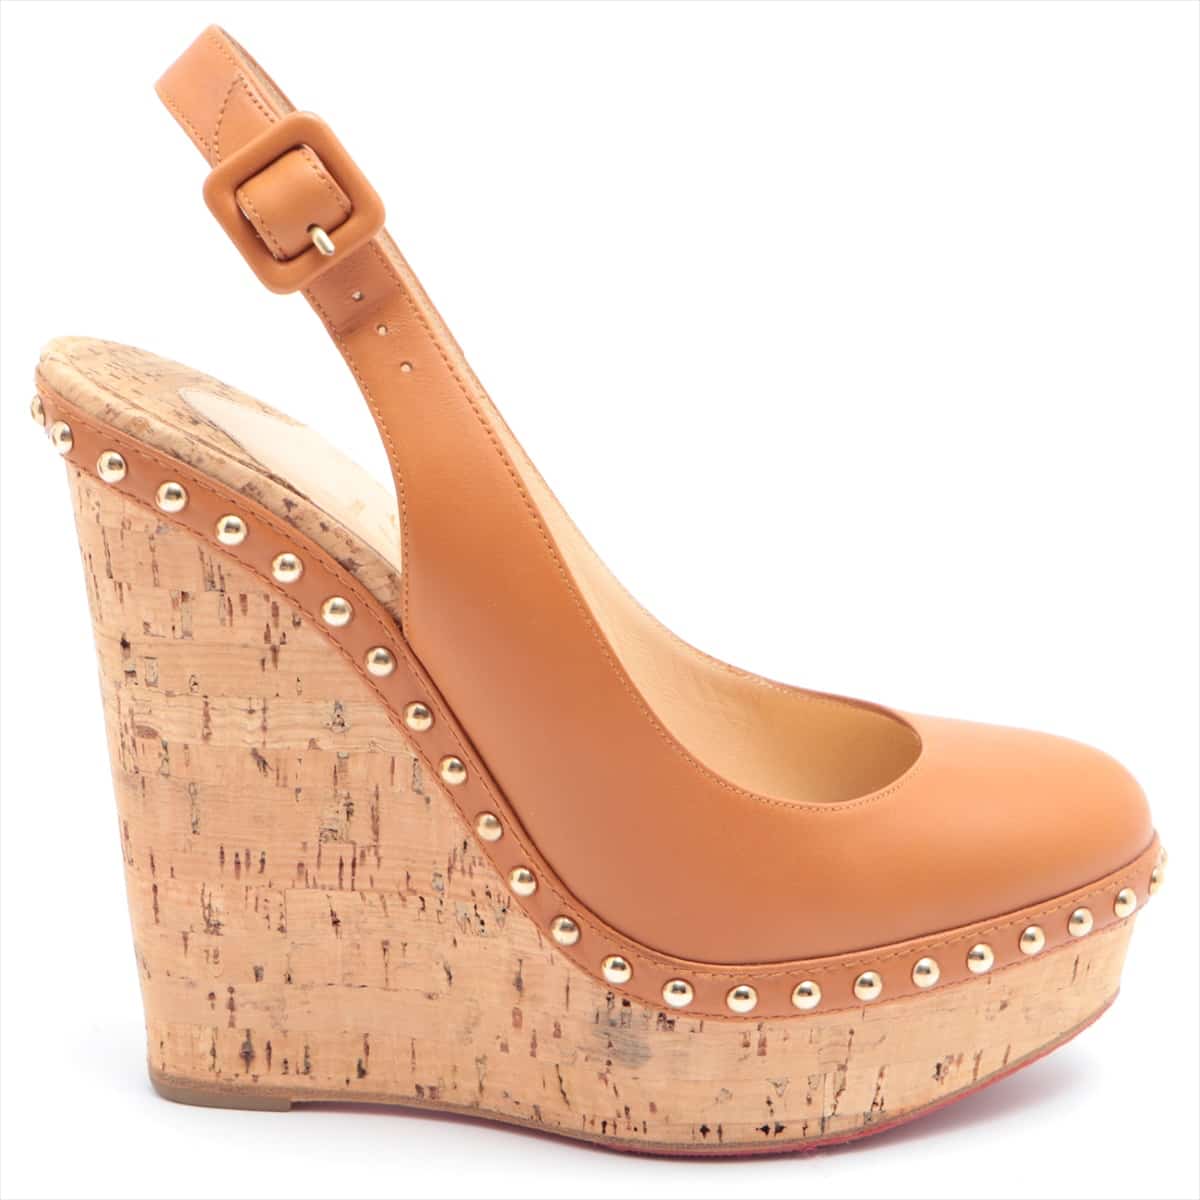 Christian Louboutin Leather Wedge Sole Sandals 37 Ladies' Camel There is a half rubber sole